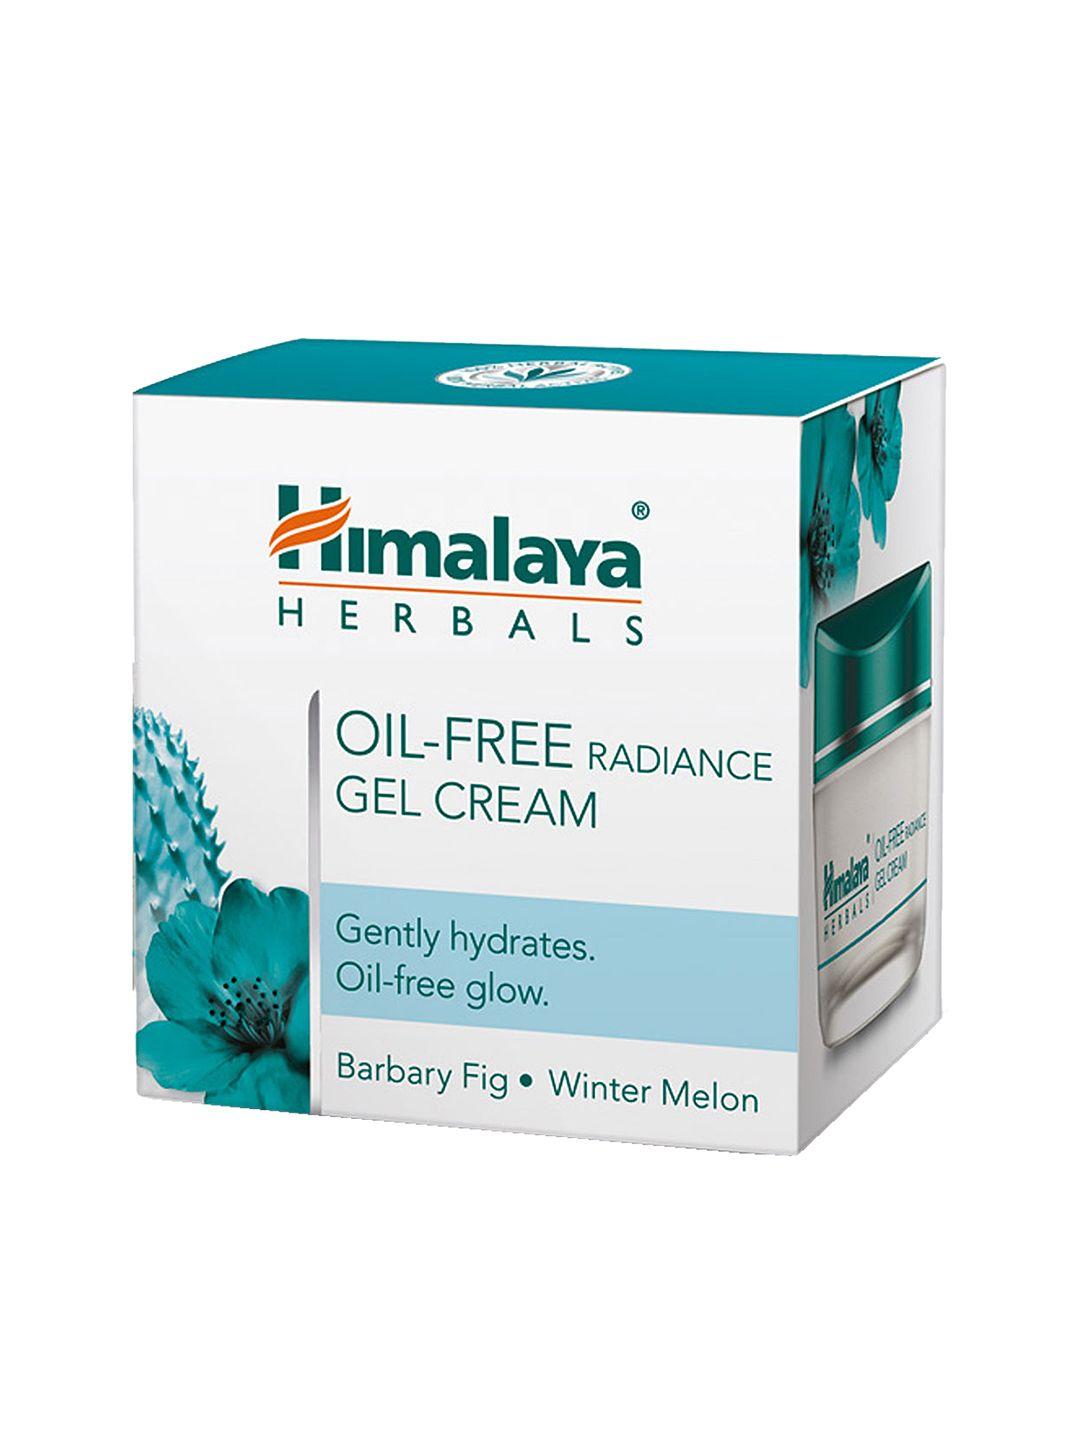 himalaya-oil-free-radiance-gel-cream-with-barbary-fig-&-winter-melon-50-g